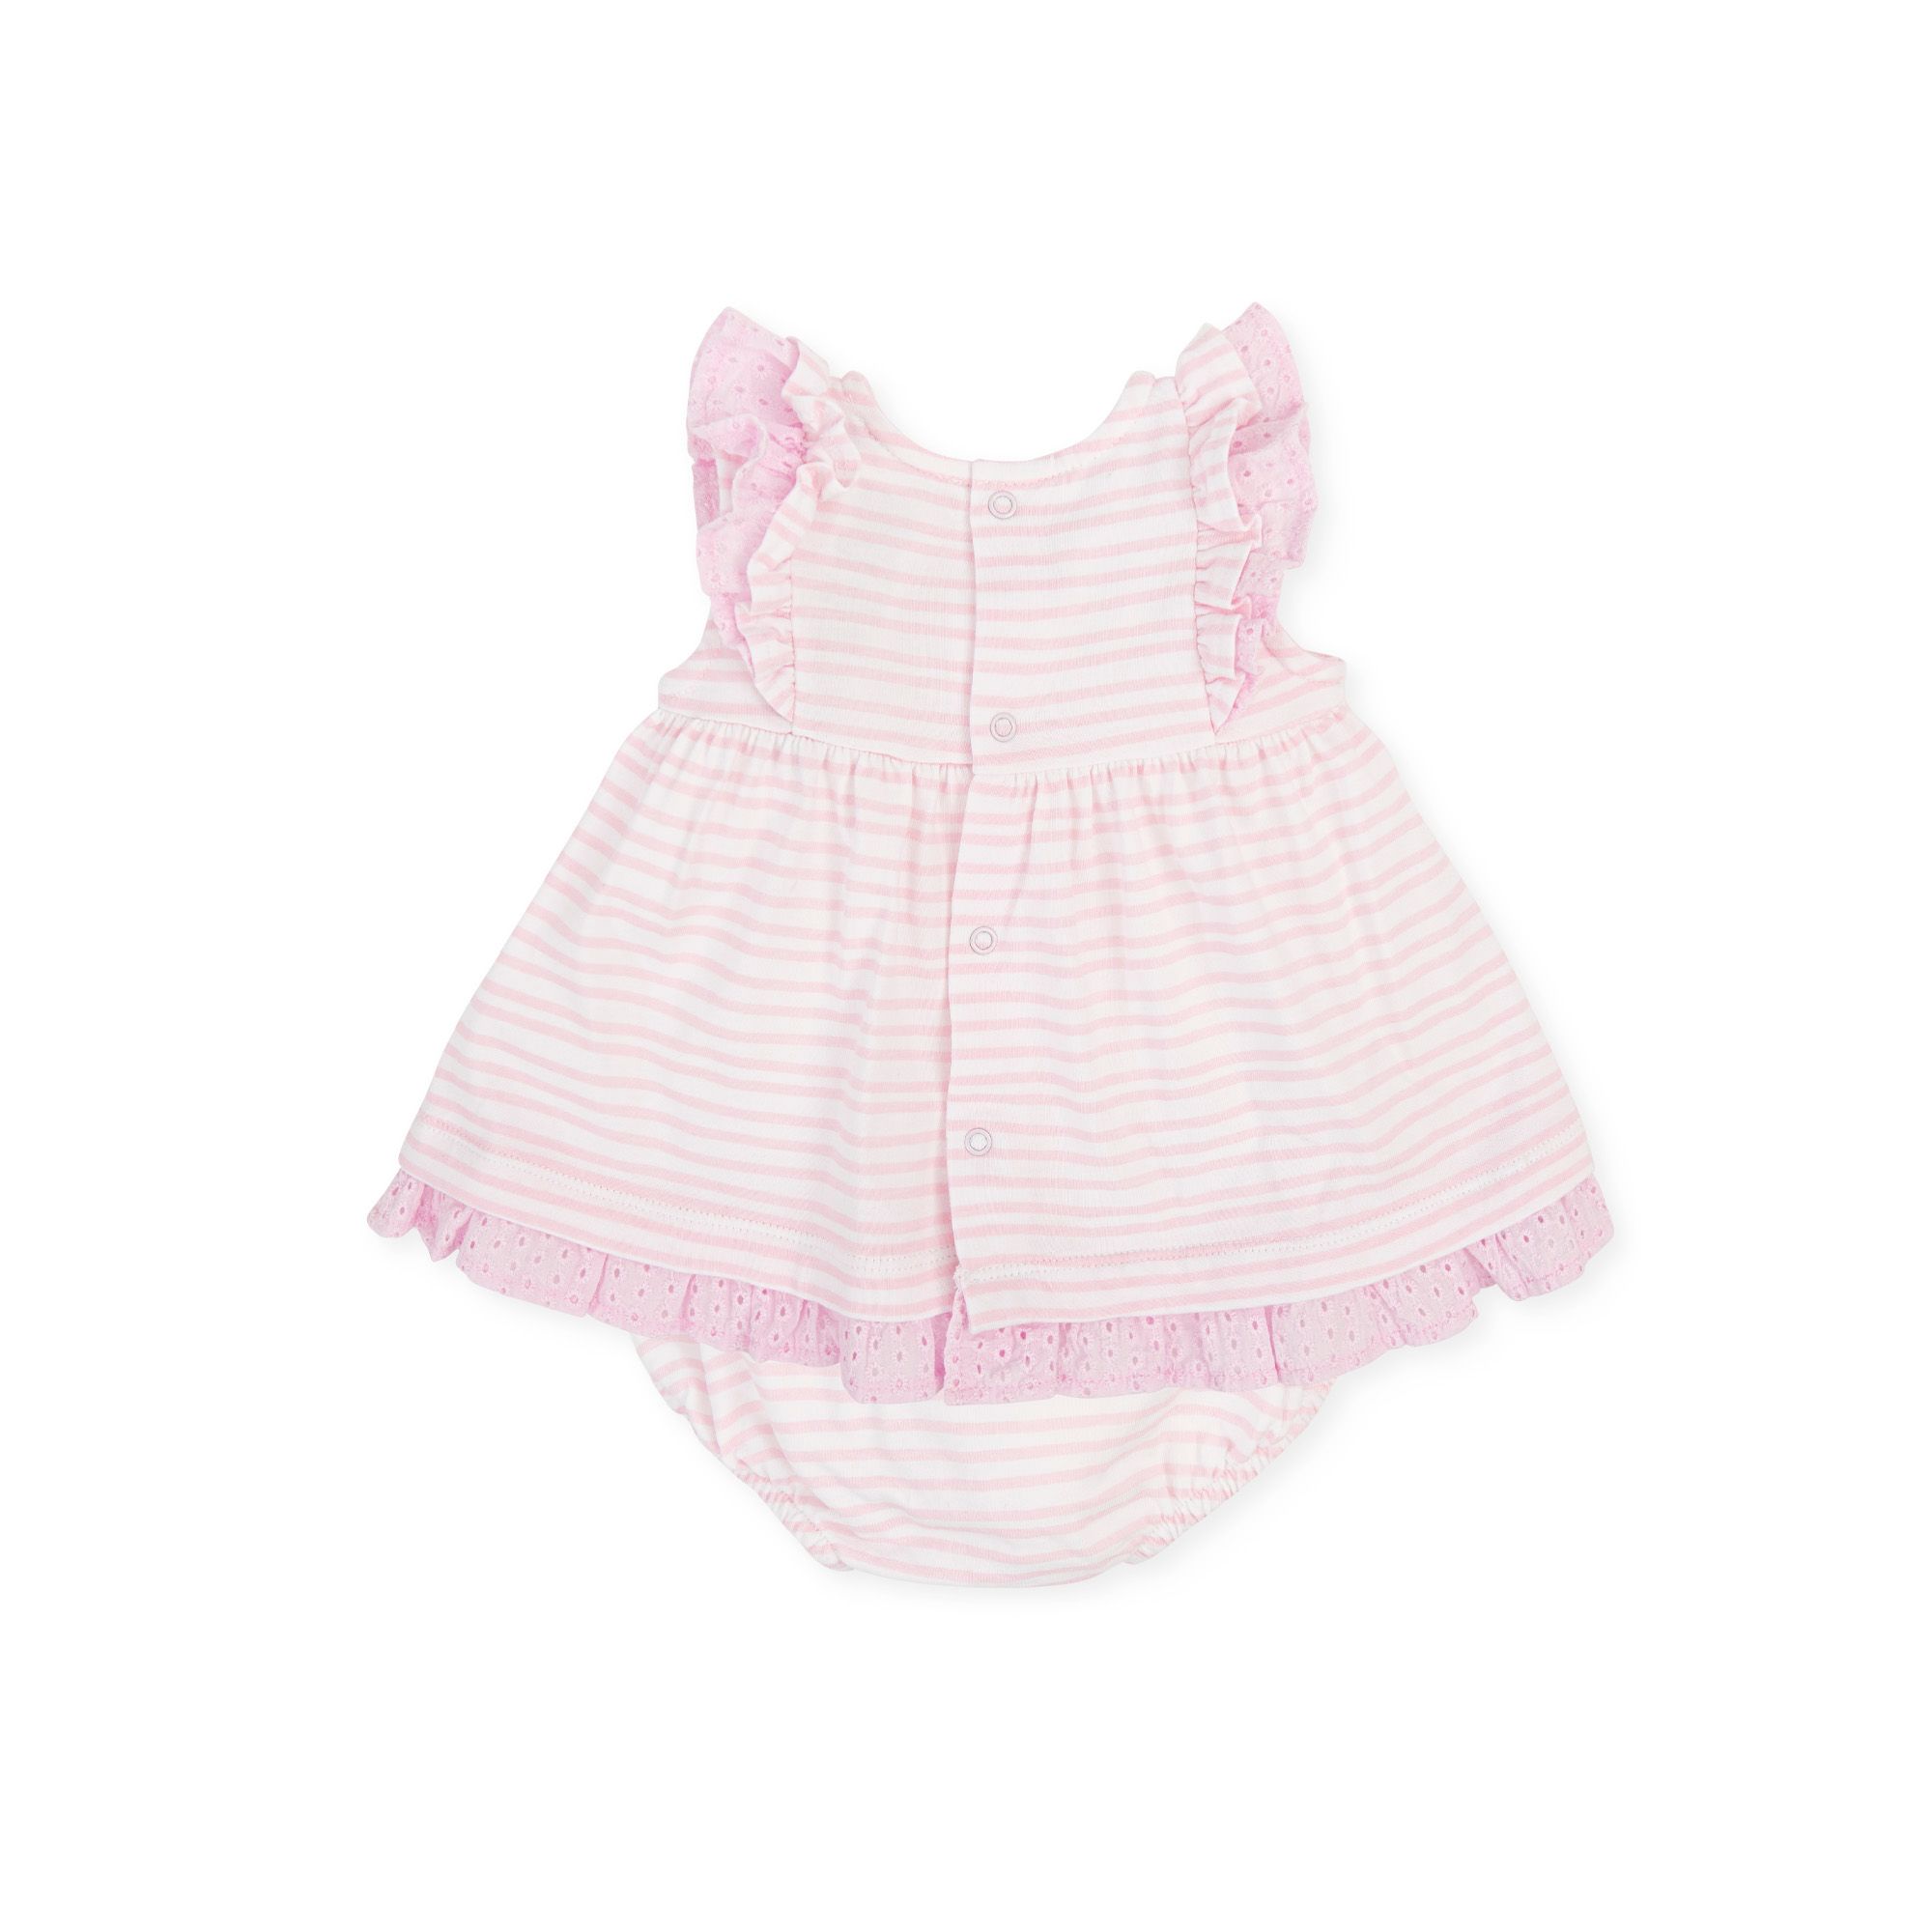 Tutto Piccolo pink dress and briefs 5785 - Niamh & Ruby's